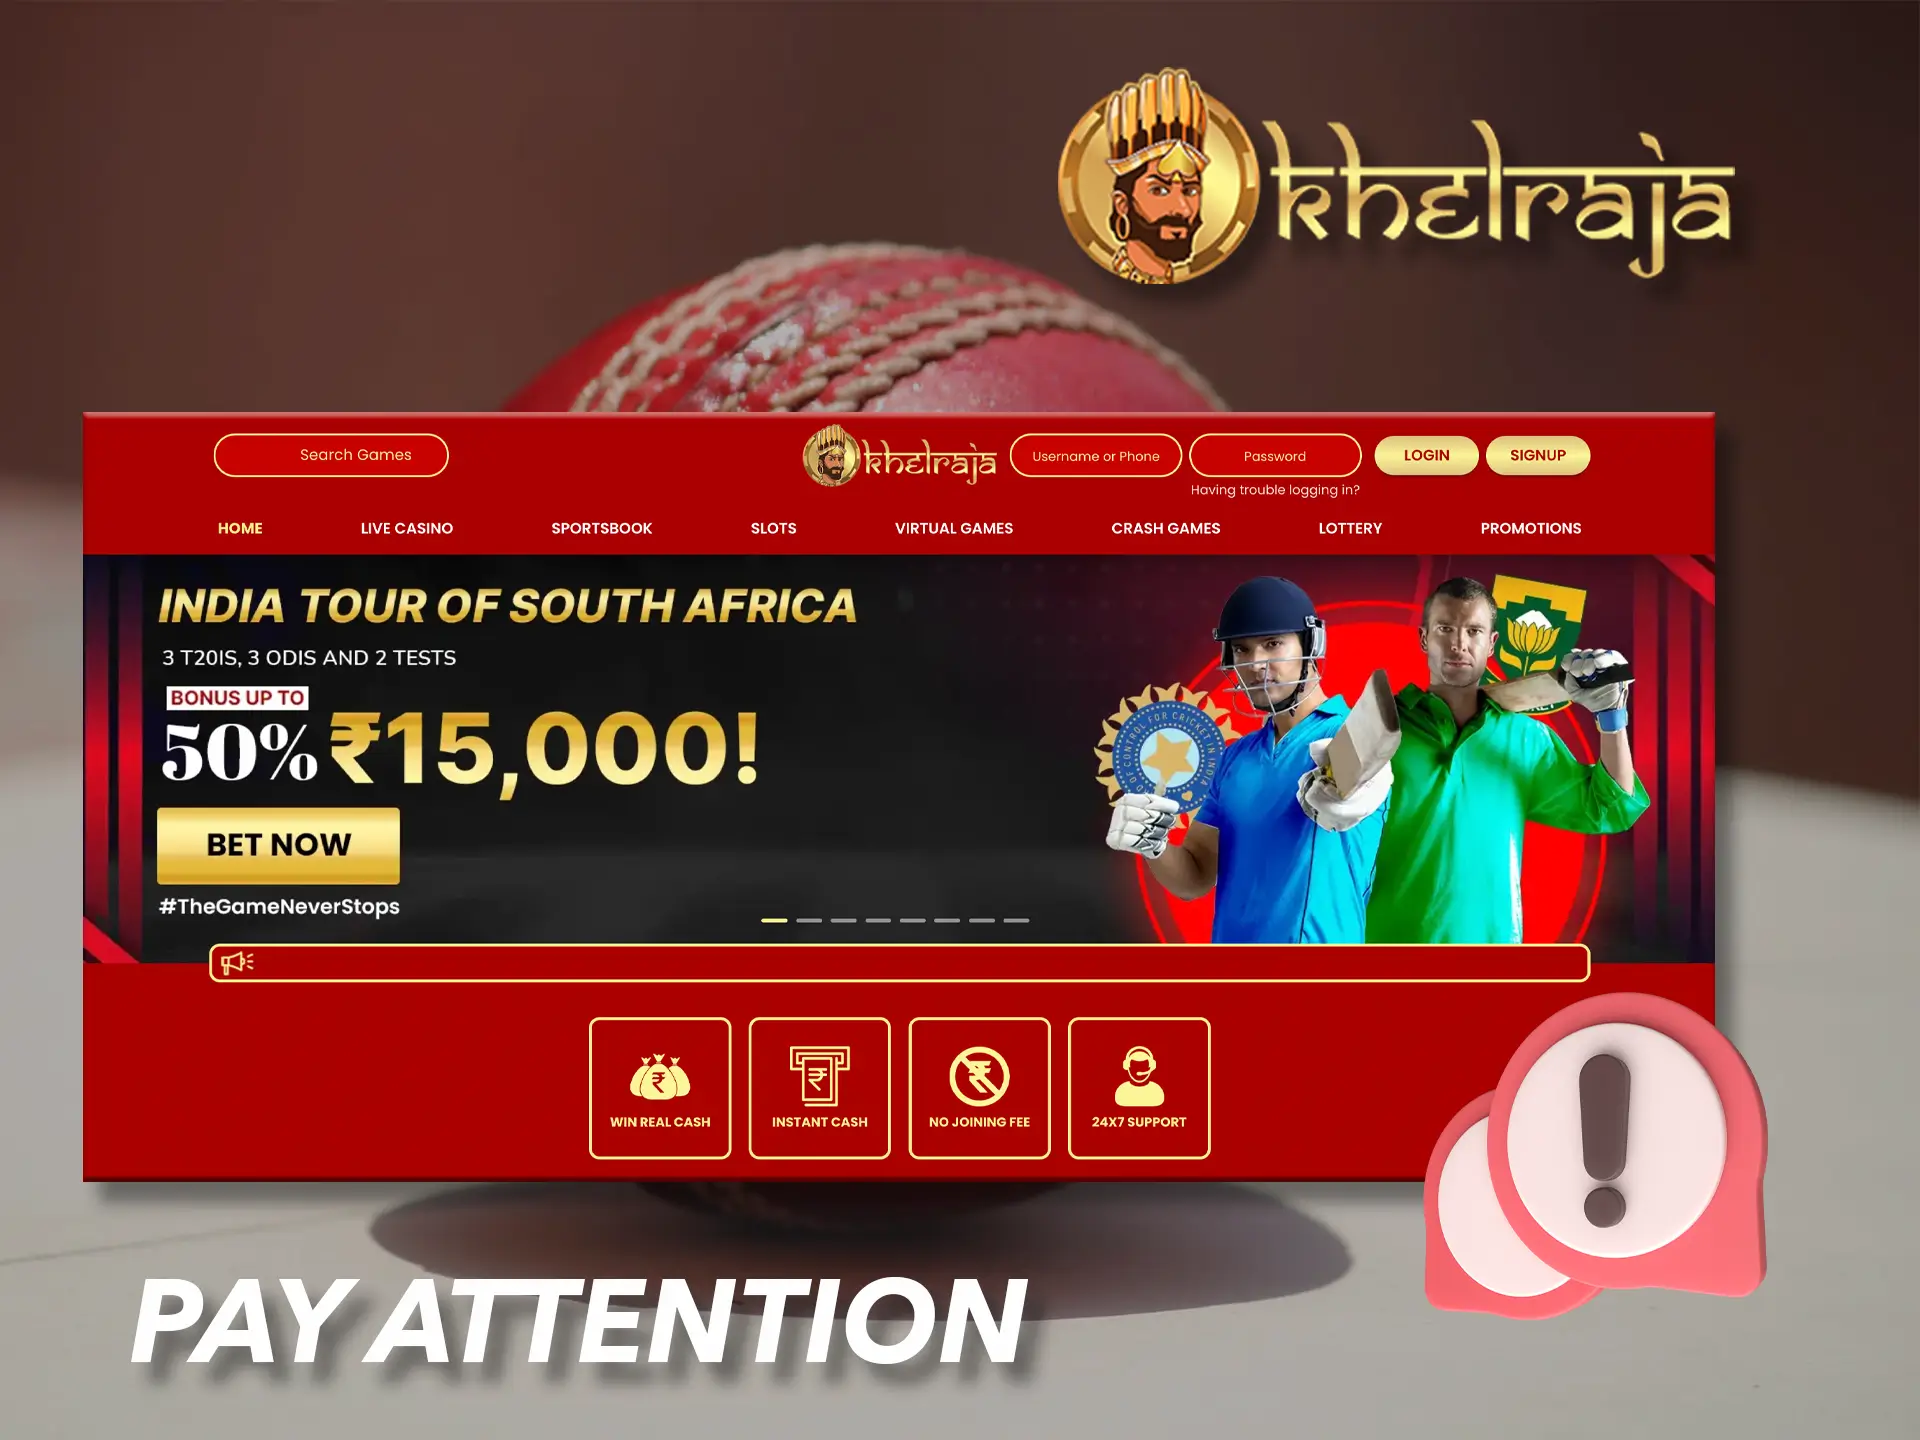 Place your bets intelligently and with analysis at Khelraja.